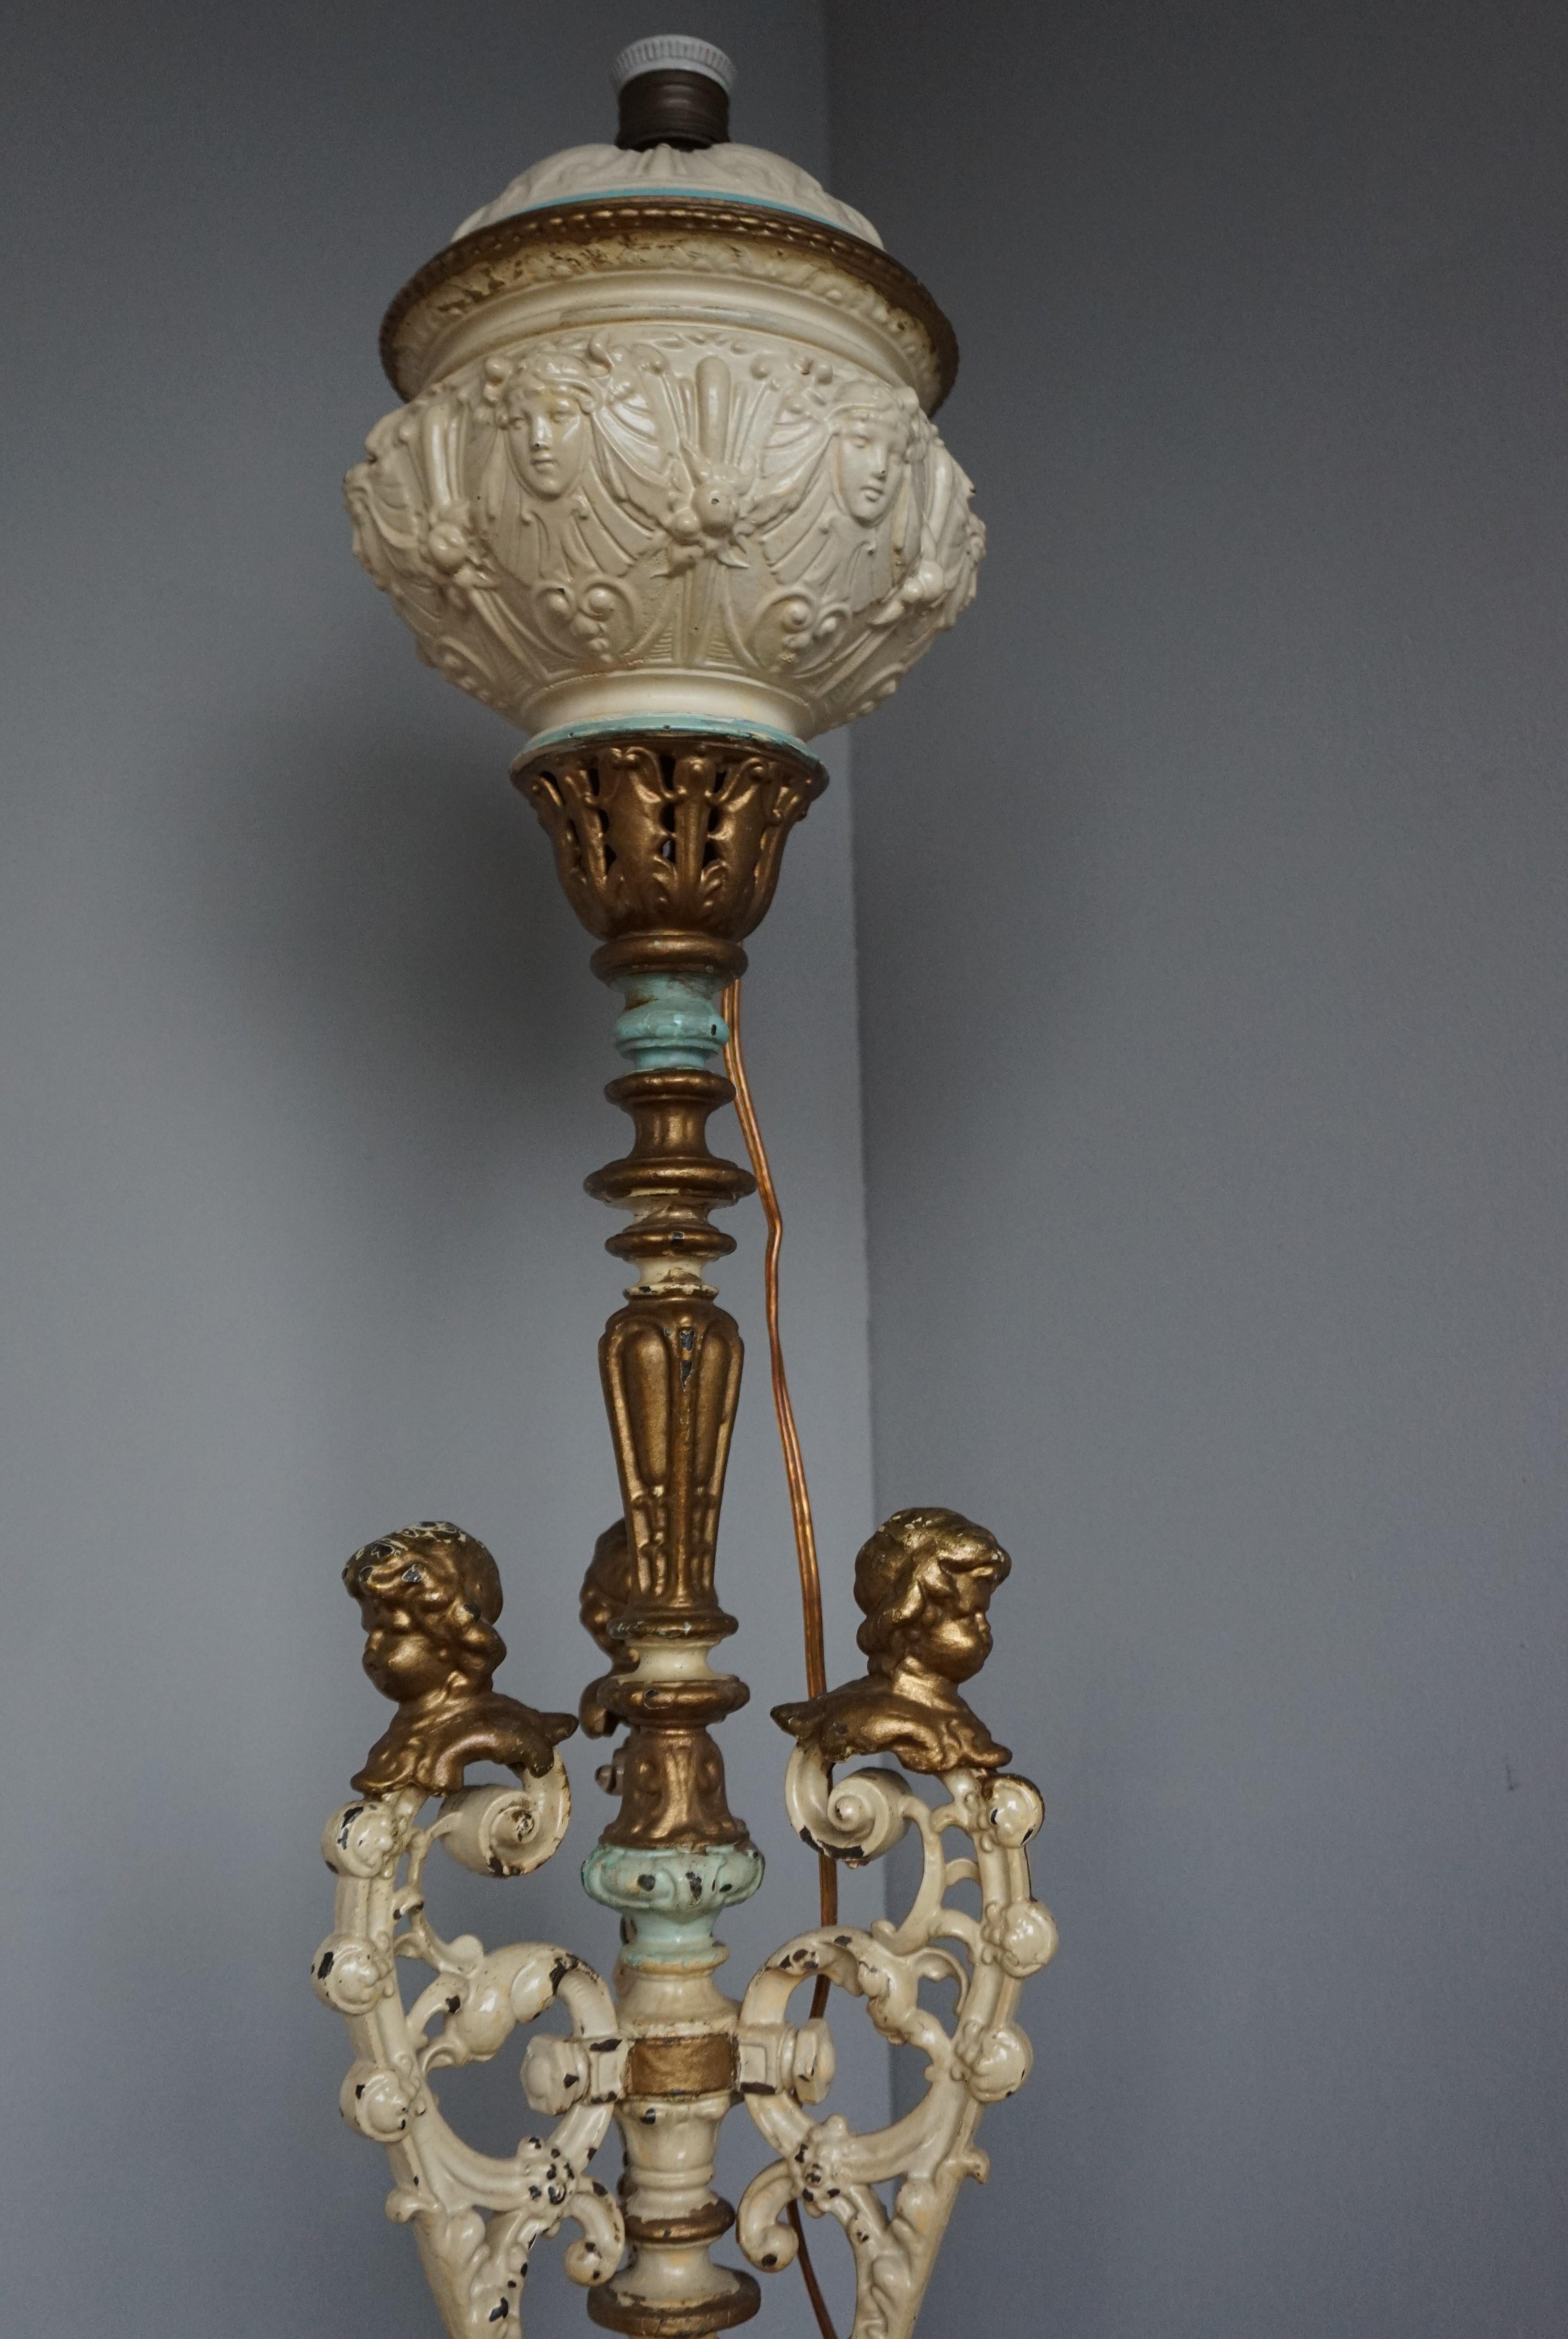 Antique and Painted Cast Iron Baroque Revival Floor Lamp w. Putti Bust Sculpture For Sale 8